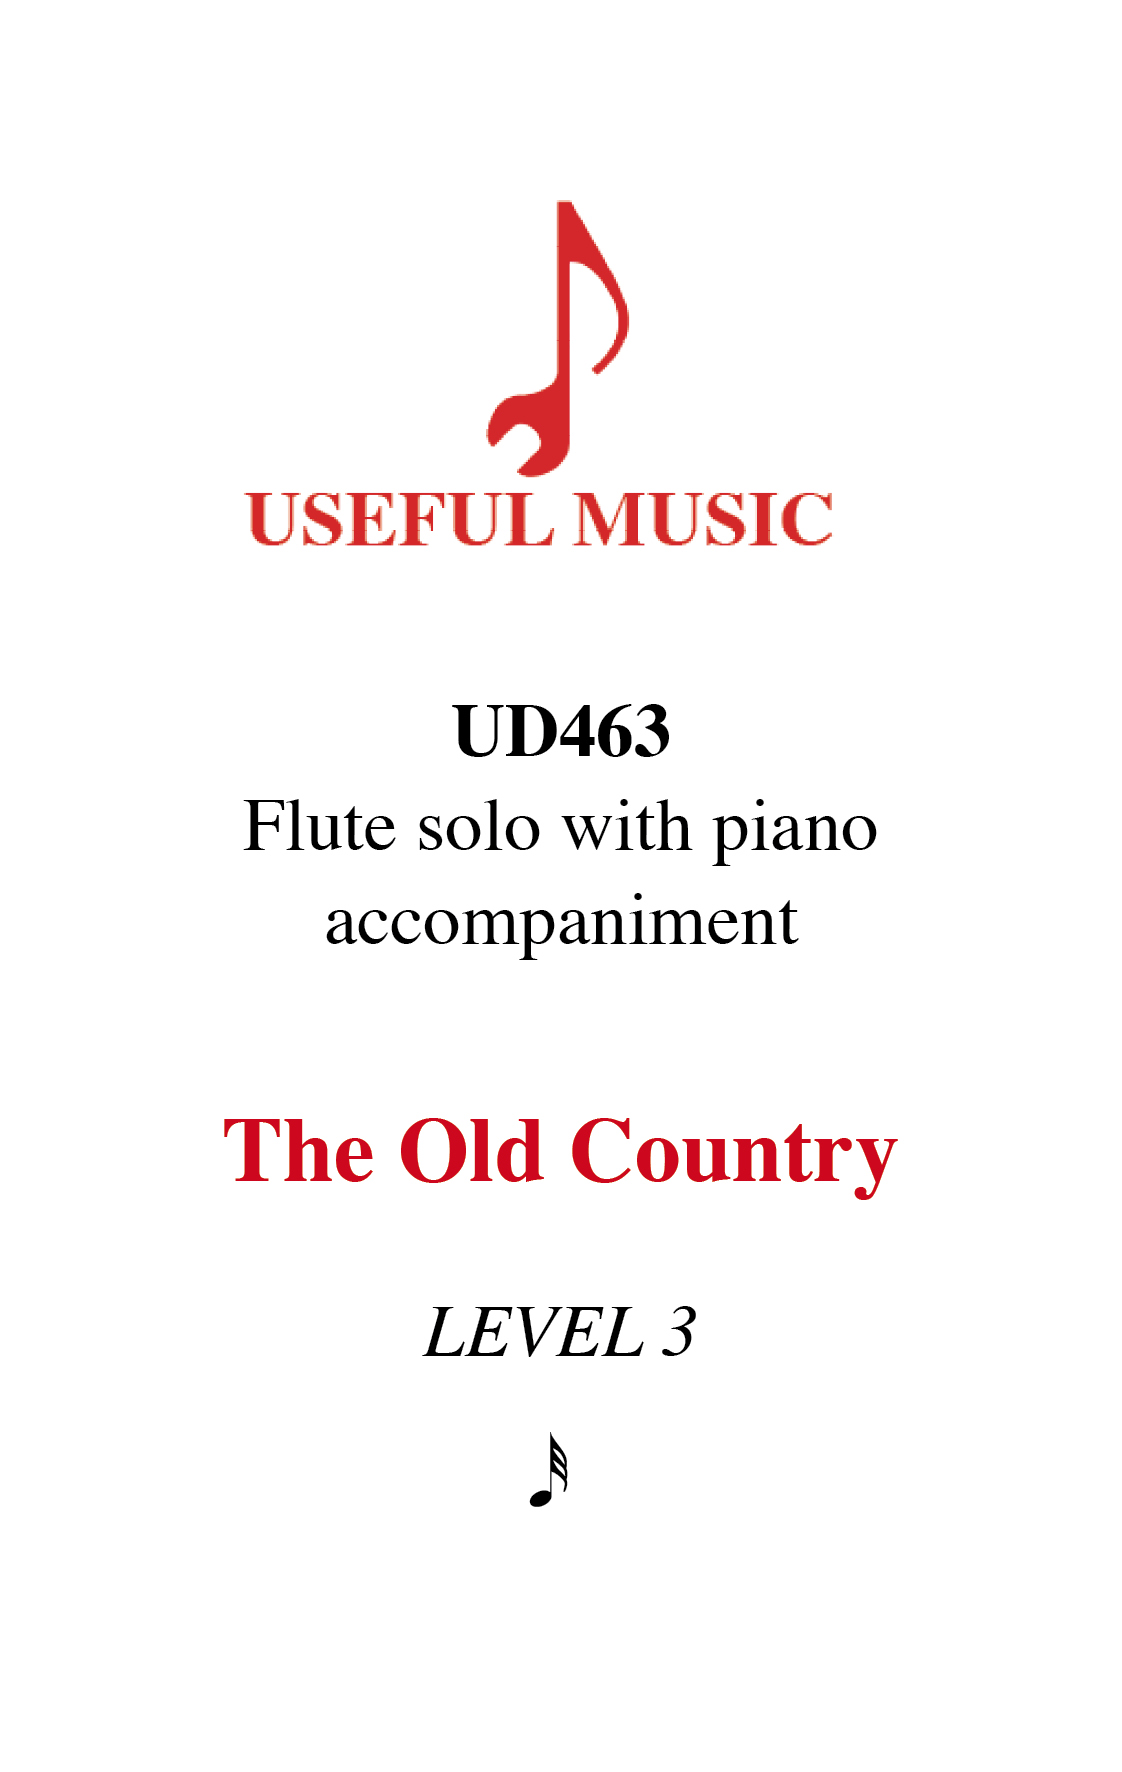 The Old Country - flute with piano accompaniment